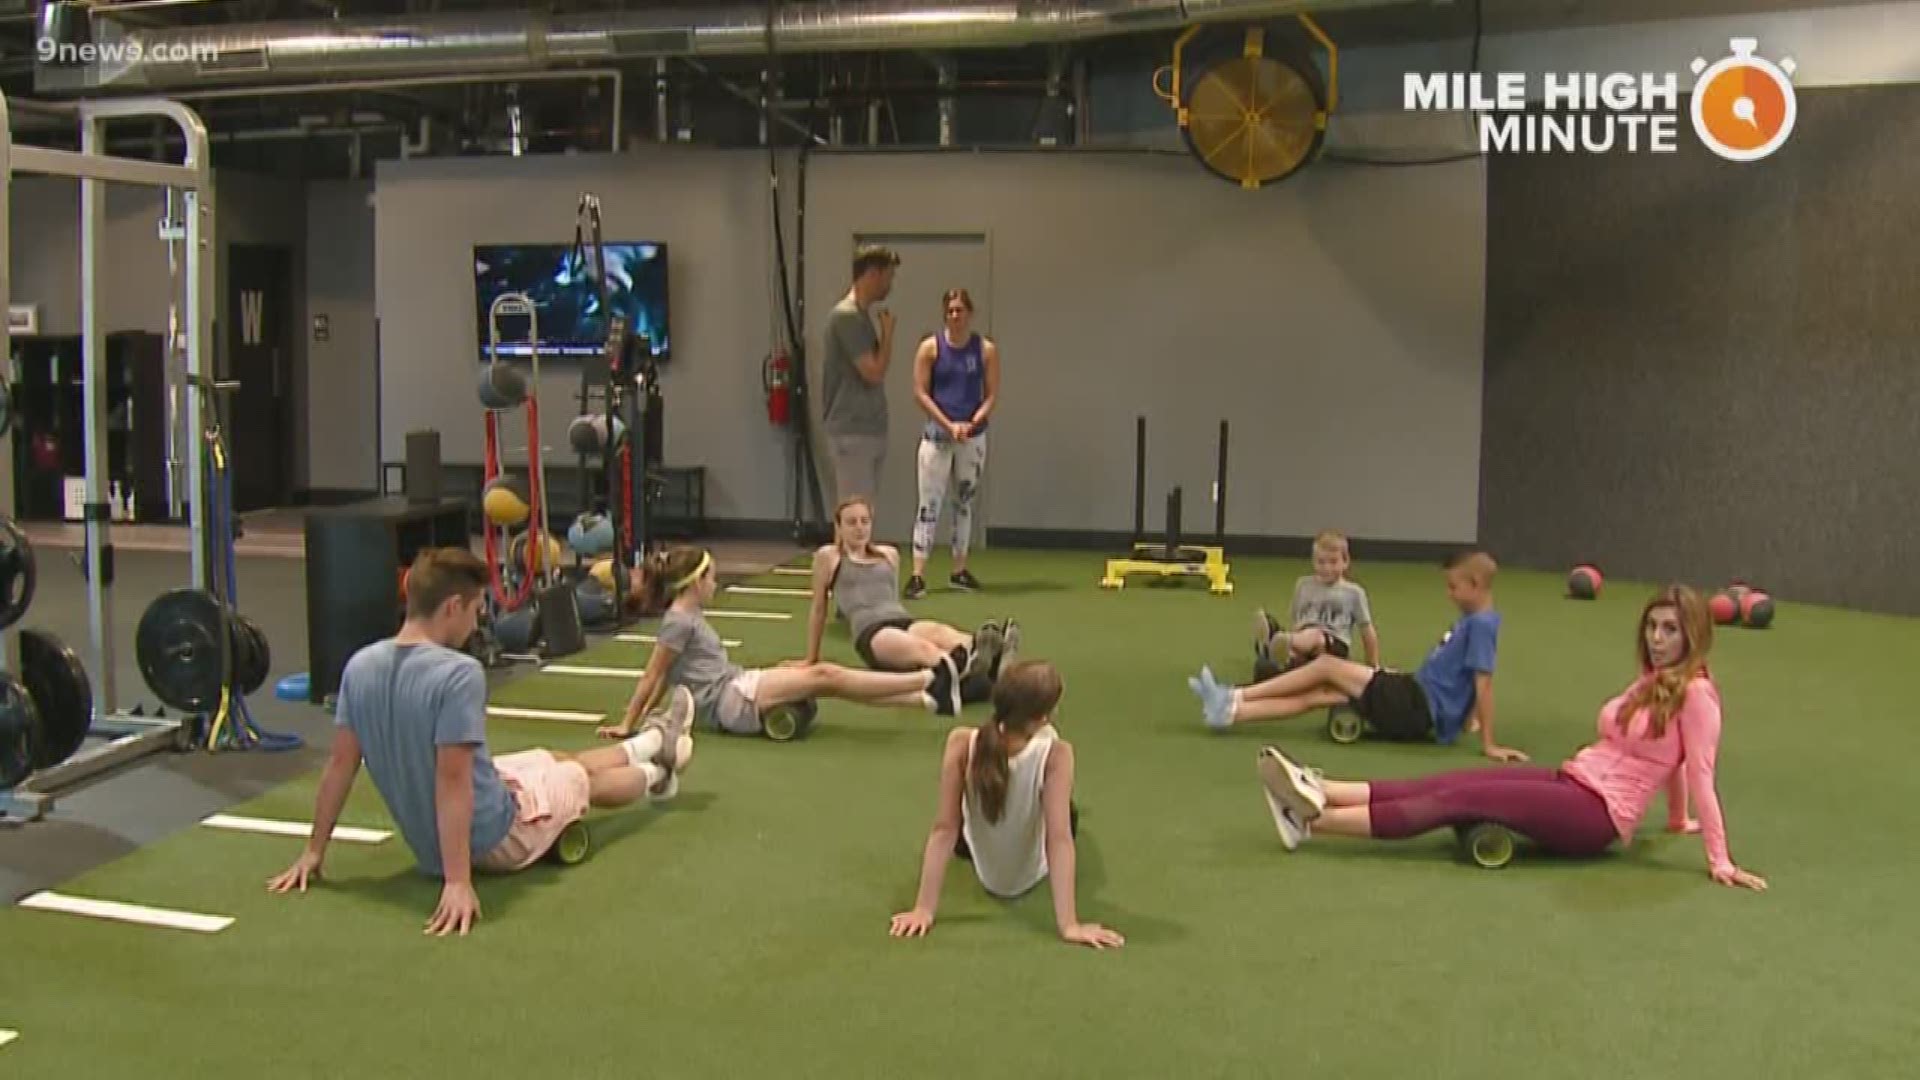 Dryland Sports in Denver offers a 3-part workout for the entire family.